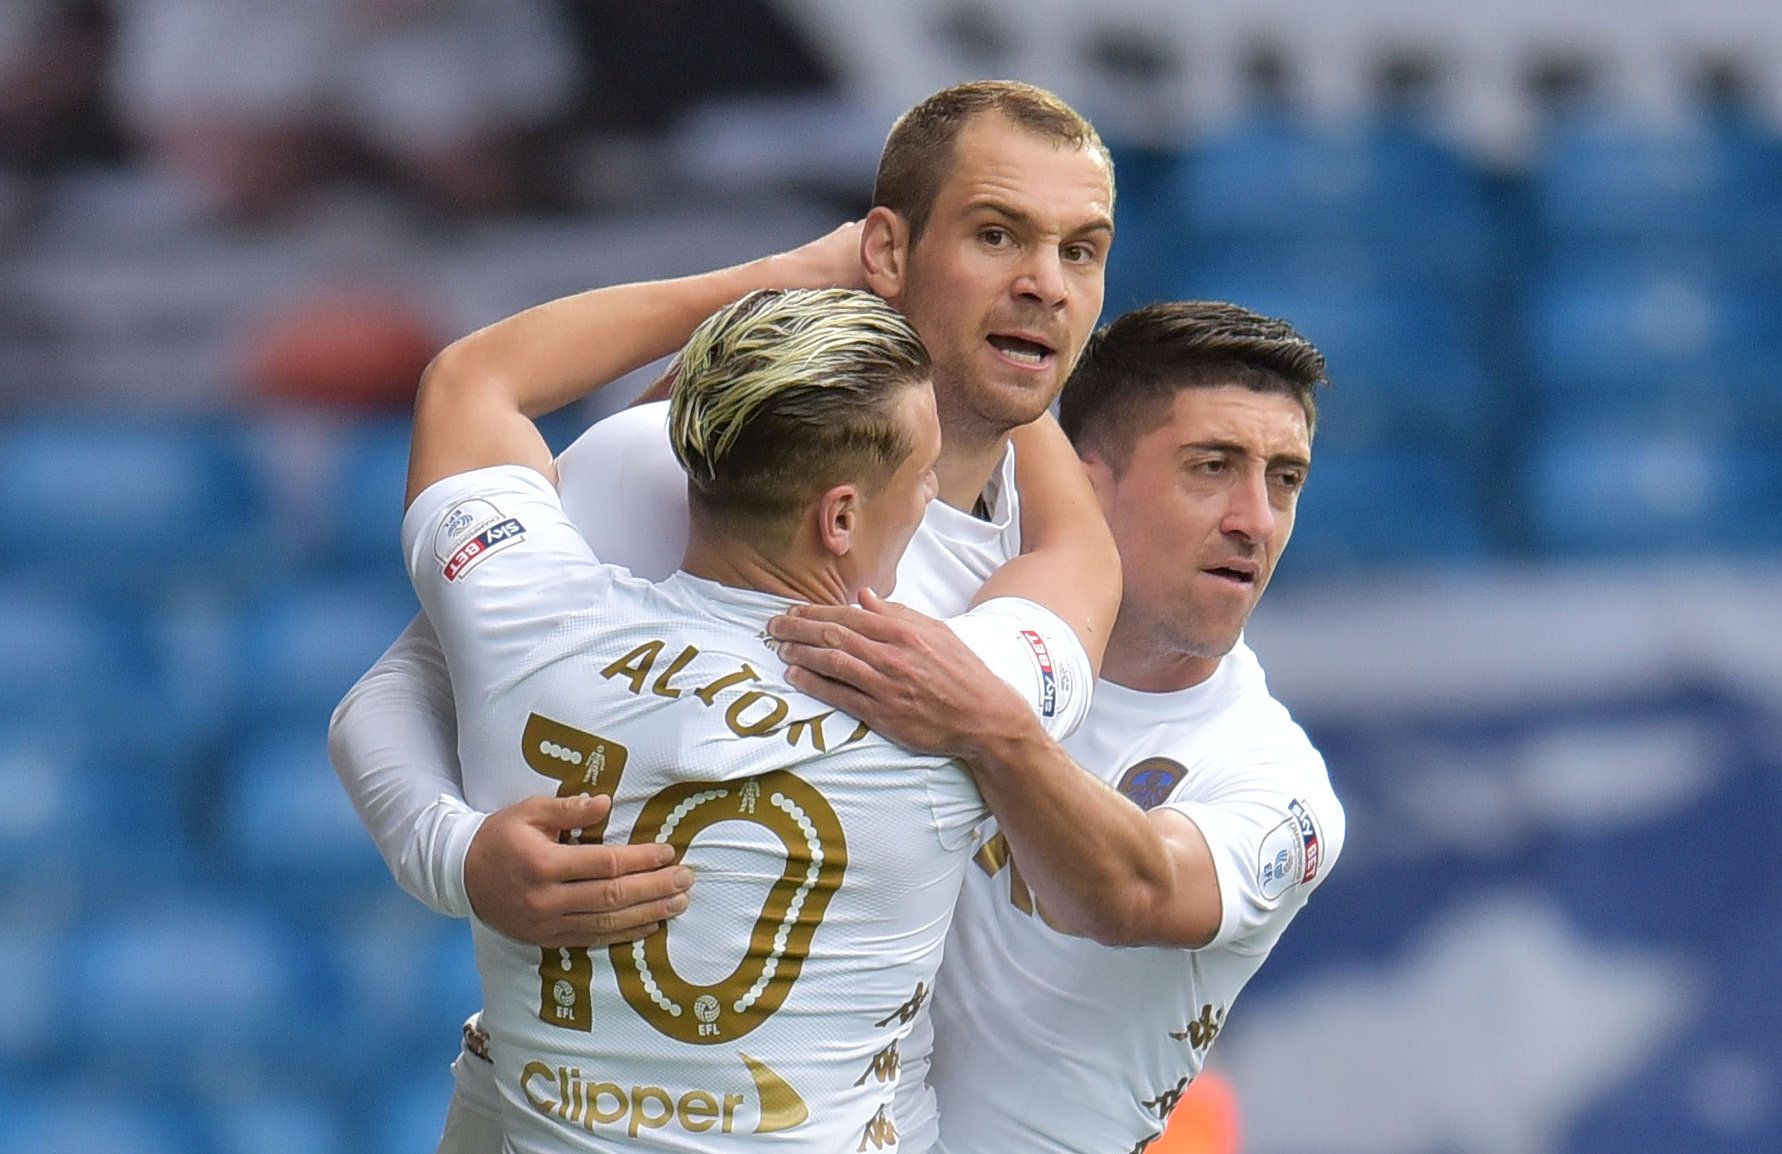 Soccer Football - Championship - Leeds United vs Ipswich Town - Elland Road, Leeds, Britain - September 23, 2017   Leeds United's Pierre-Michel Lasogga celebrates scoring their first goal with team mates    Action Images/Paul Burrows    EDITORIAL USE ONLY. No use with unauthorized audio, video, data, fixture lists, club/league logos or 